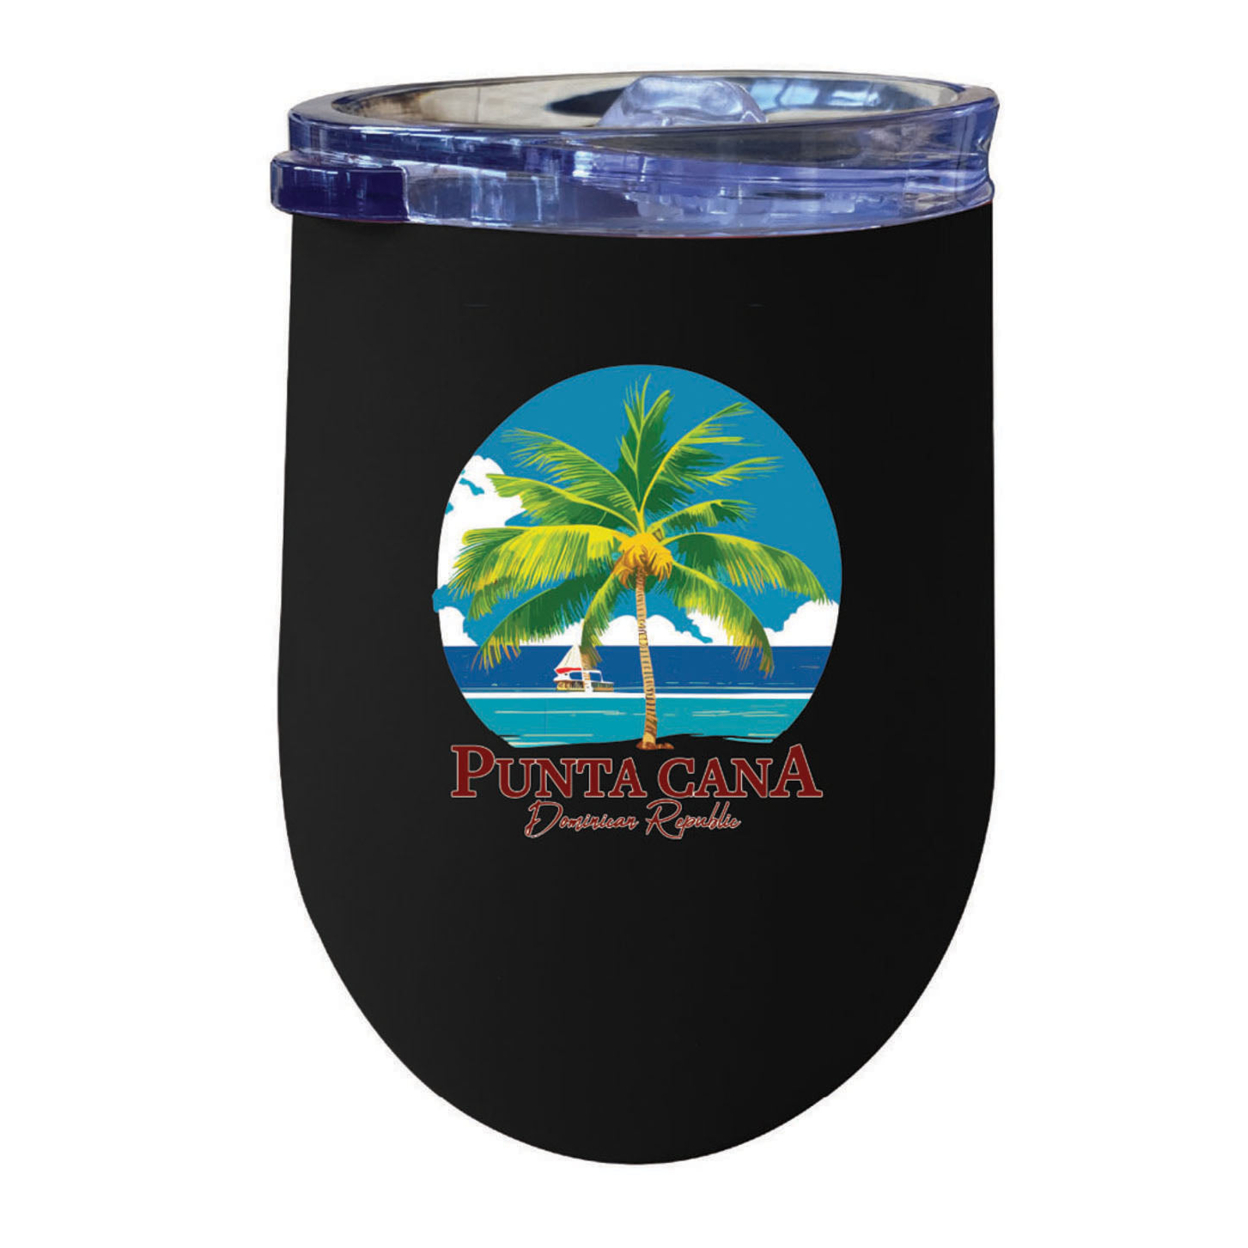 Punta Cana Dominican Republic Souvenir 12 Oz Insulated Wine Stainless Steel Tumbler - Navy, PARROT B